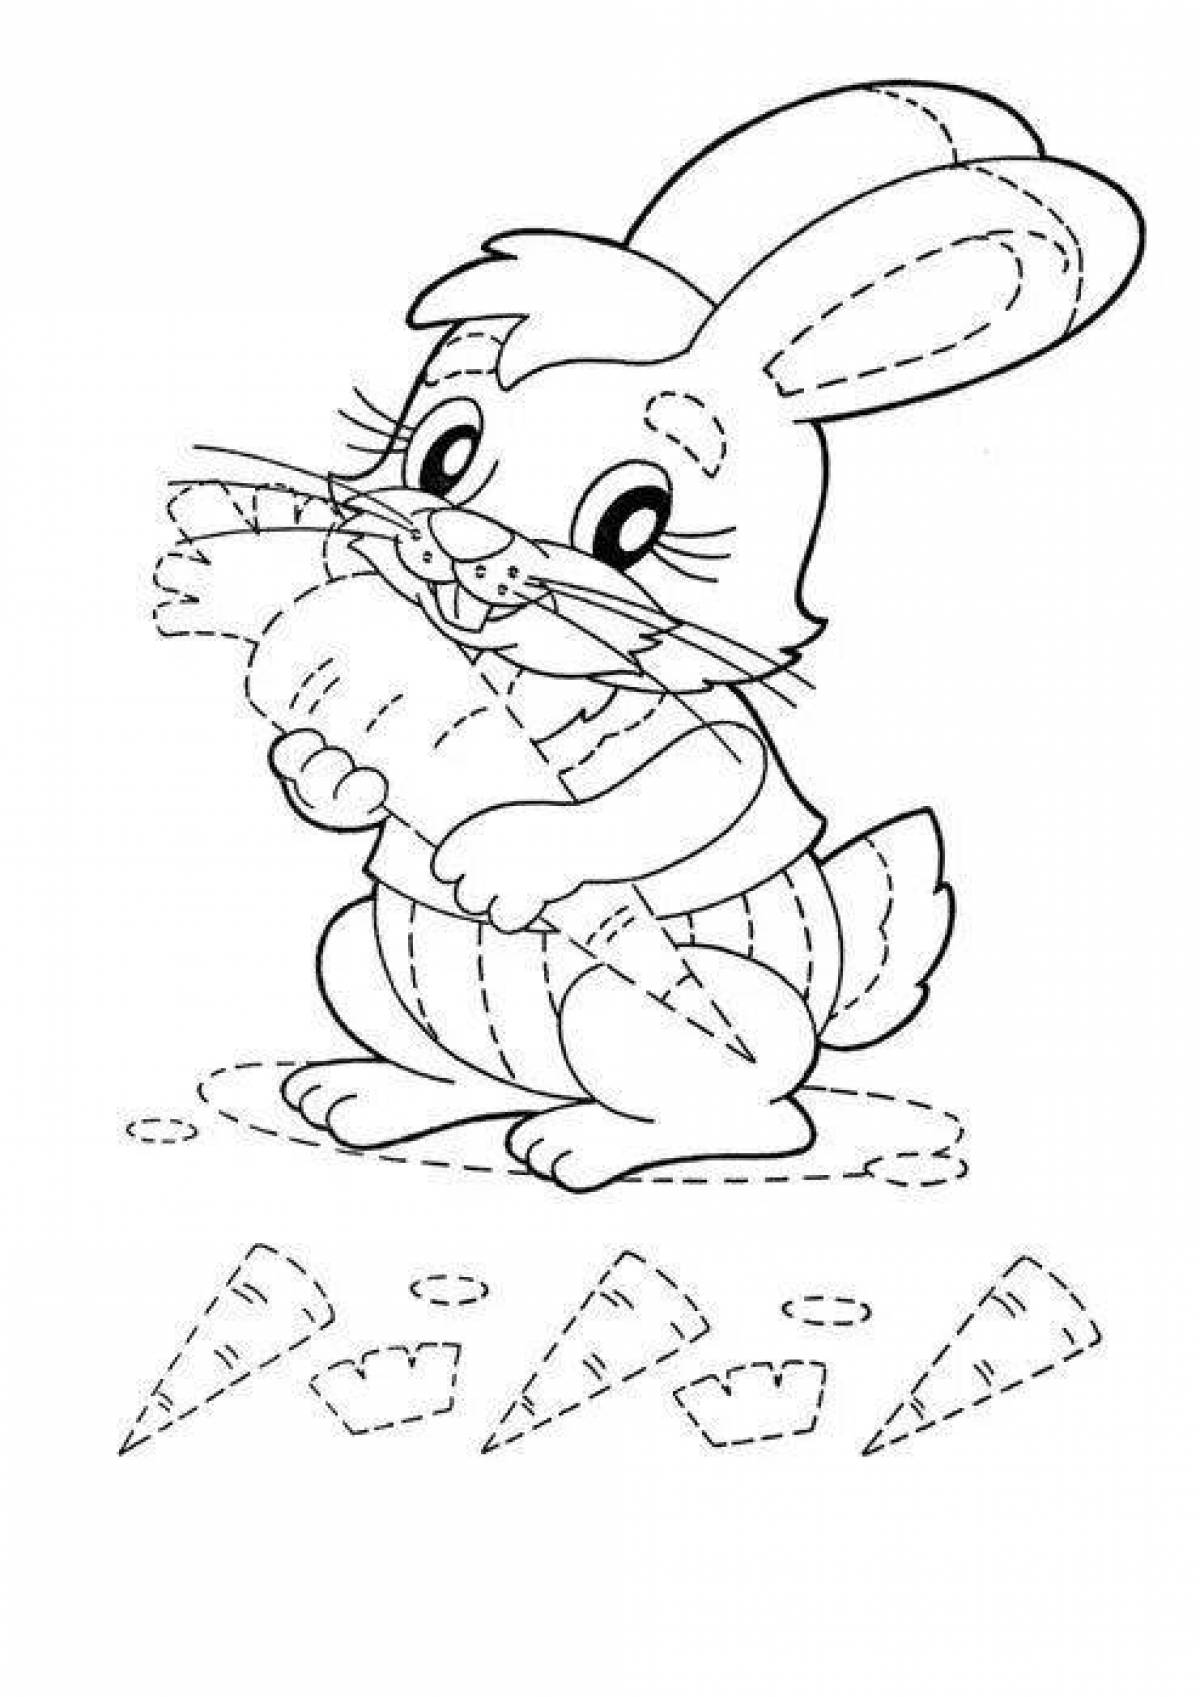 Coloring book cute rabbit for children 6-7 years old